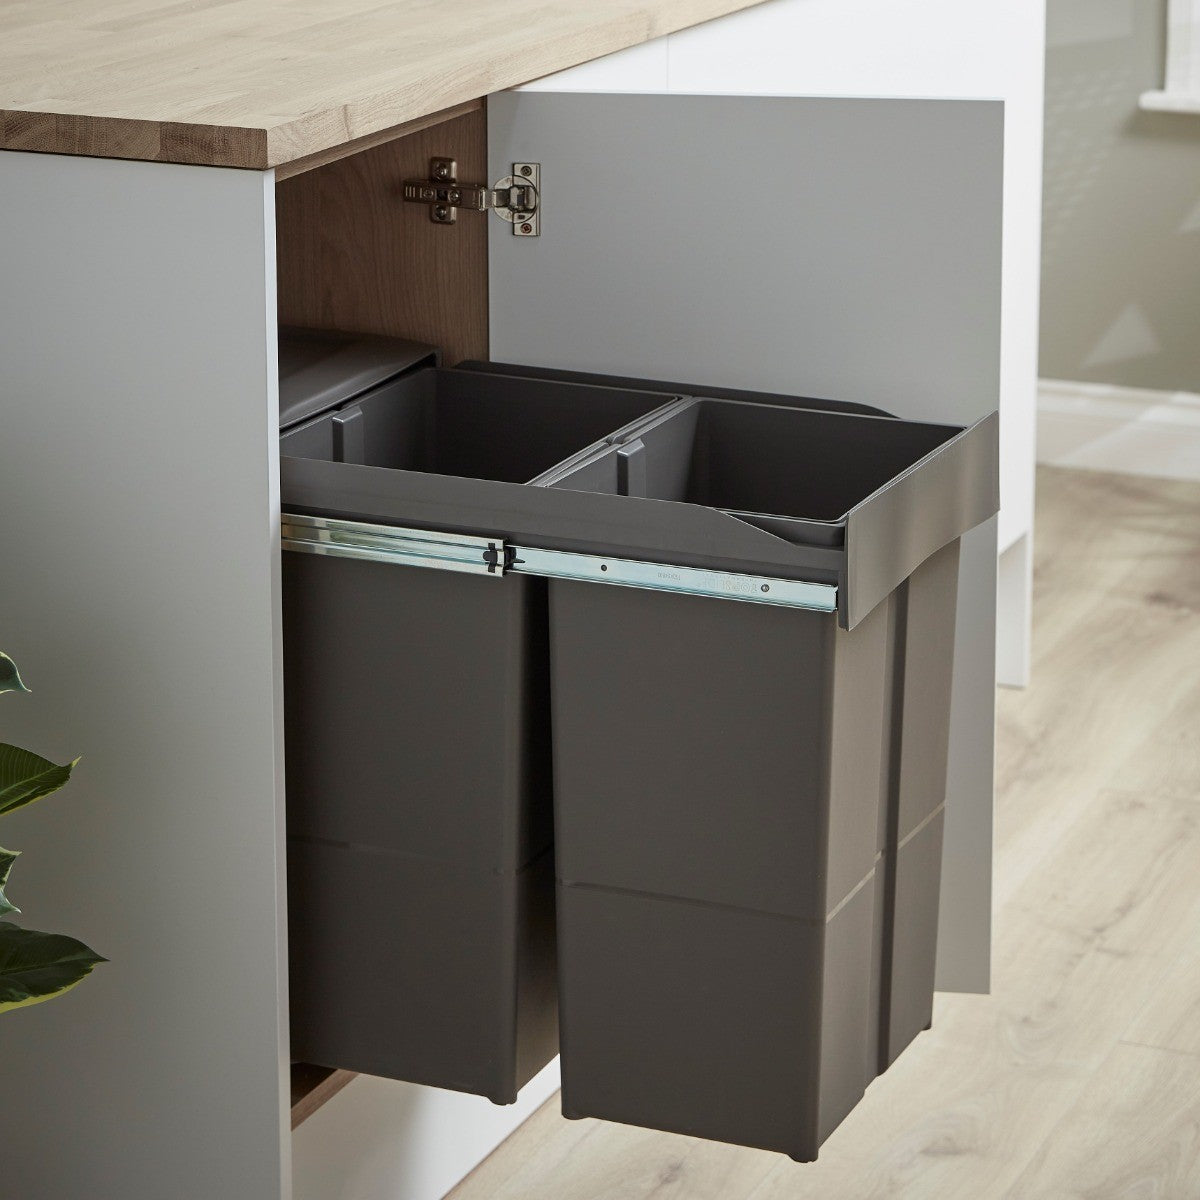 Wesco Big Bio 2 Compartment 58 litre in-cupboard kitchen recycling bin for 400mm wide hinged door cabinet 757WS829-72